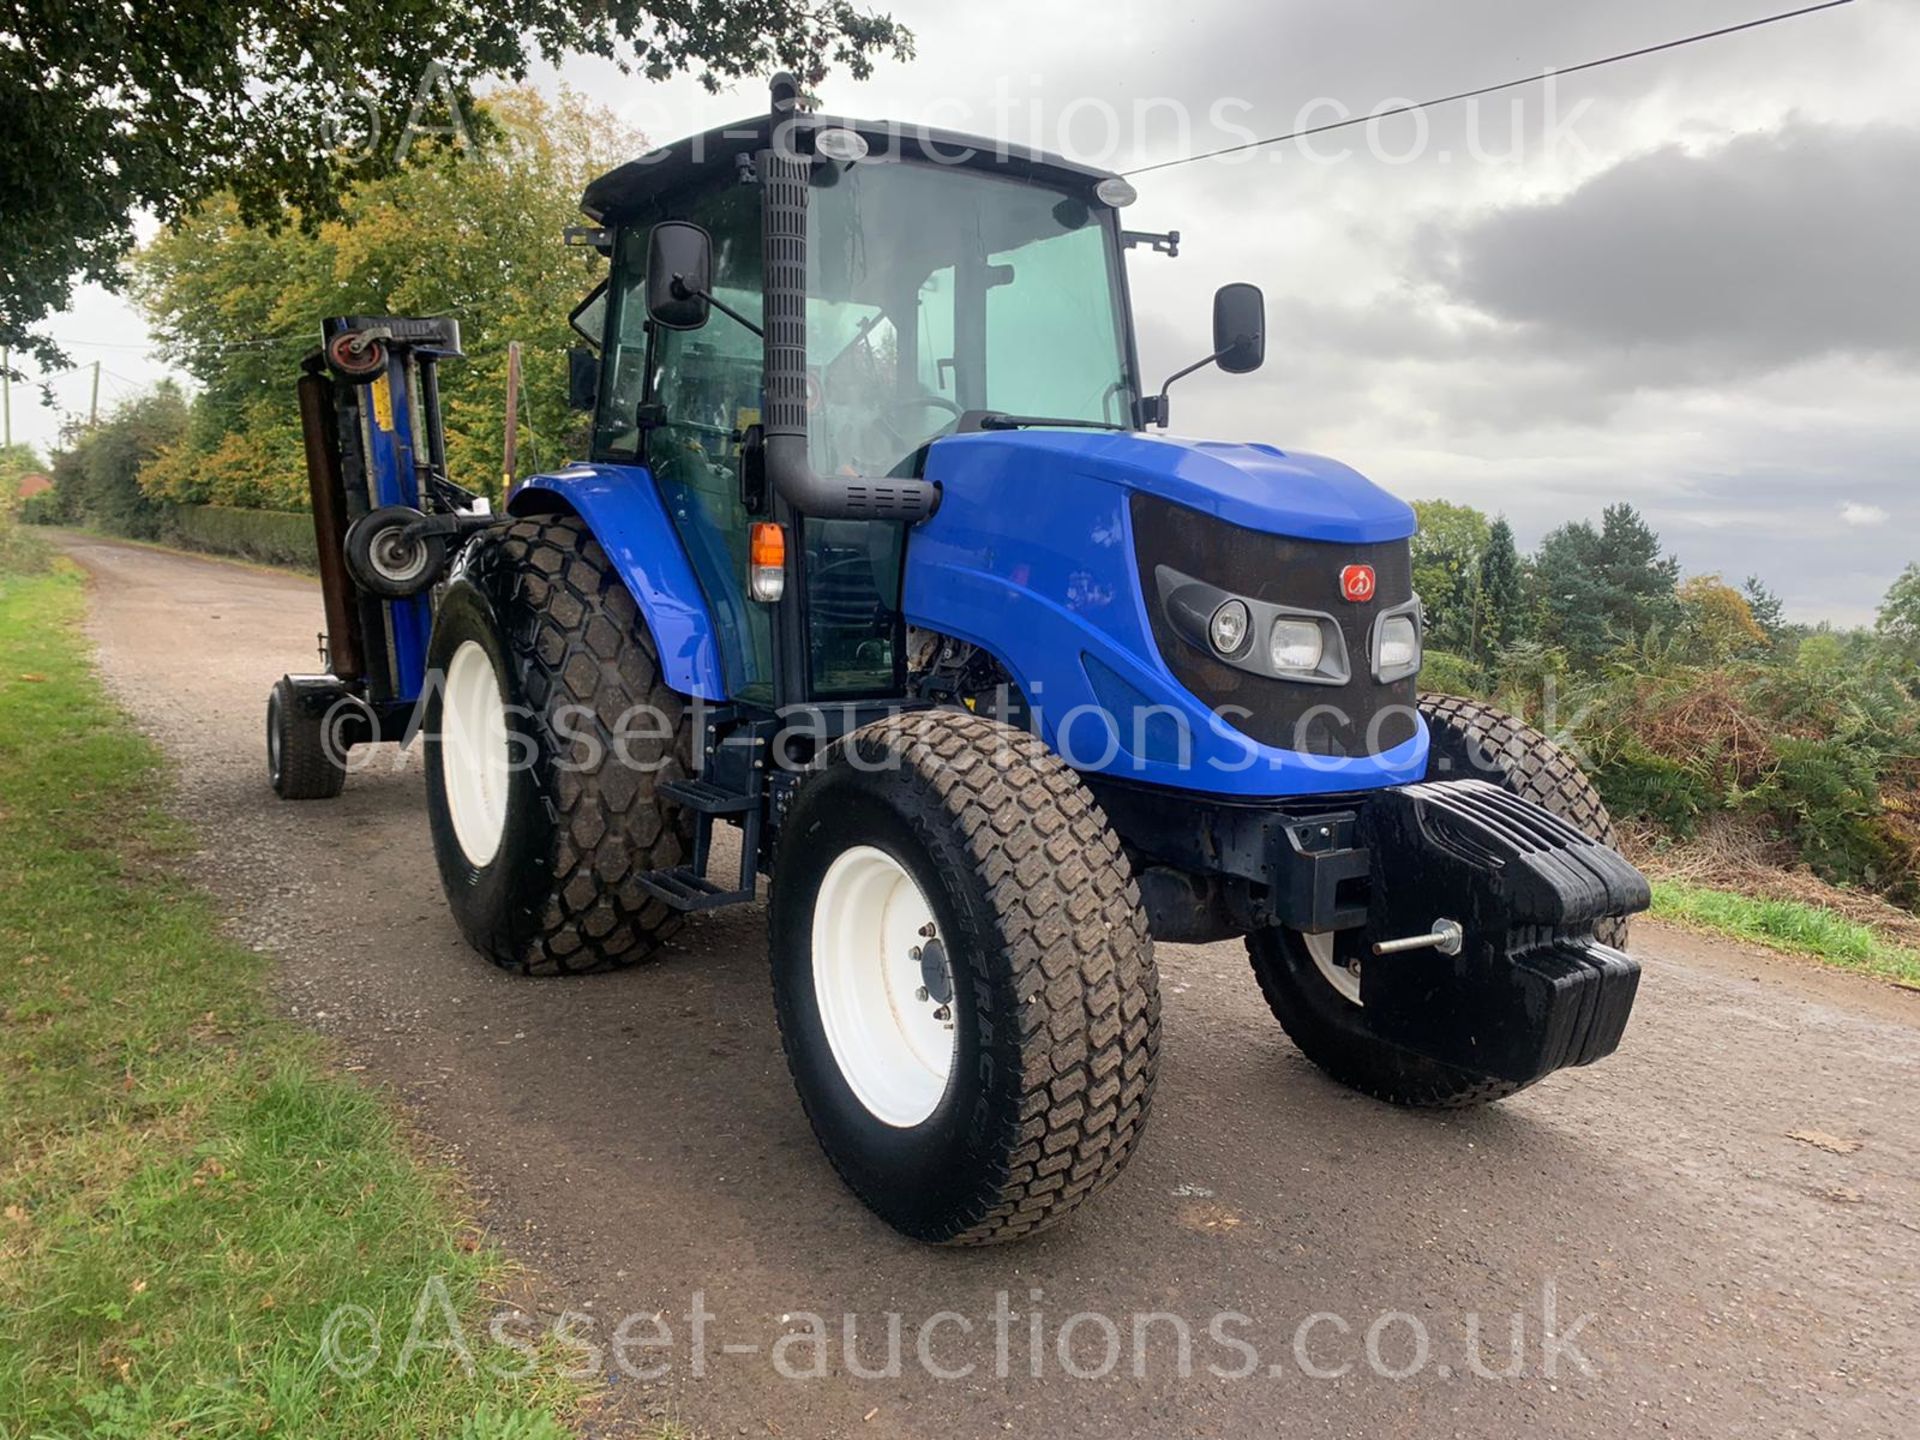 2014 ISEKI TJA8080 86hp 4WD TRACTOR, RUNS DRIVES AND WORKS, SHOWING A LOW AN GENUINE 960 HOURS